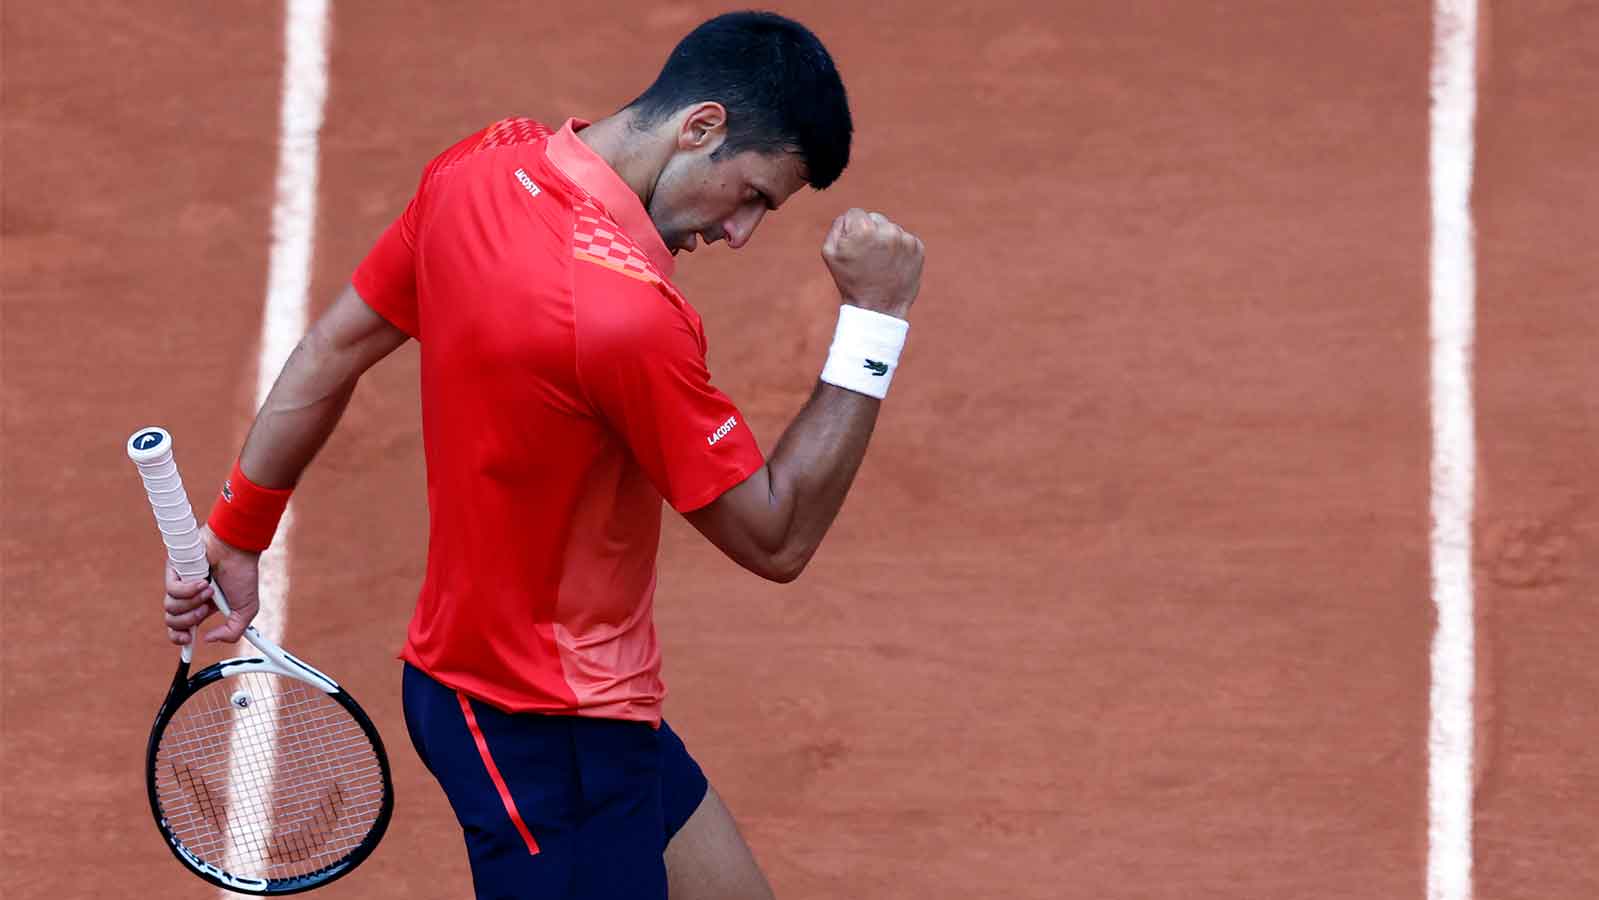 Alcaraz at risk before US Open as Djokovic loss causes shift in